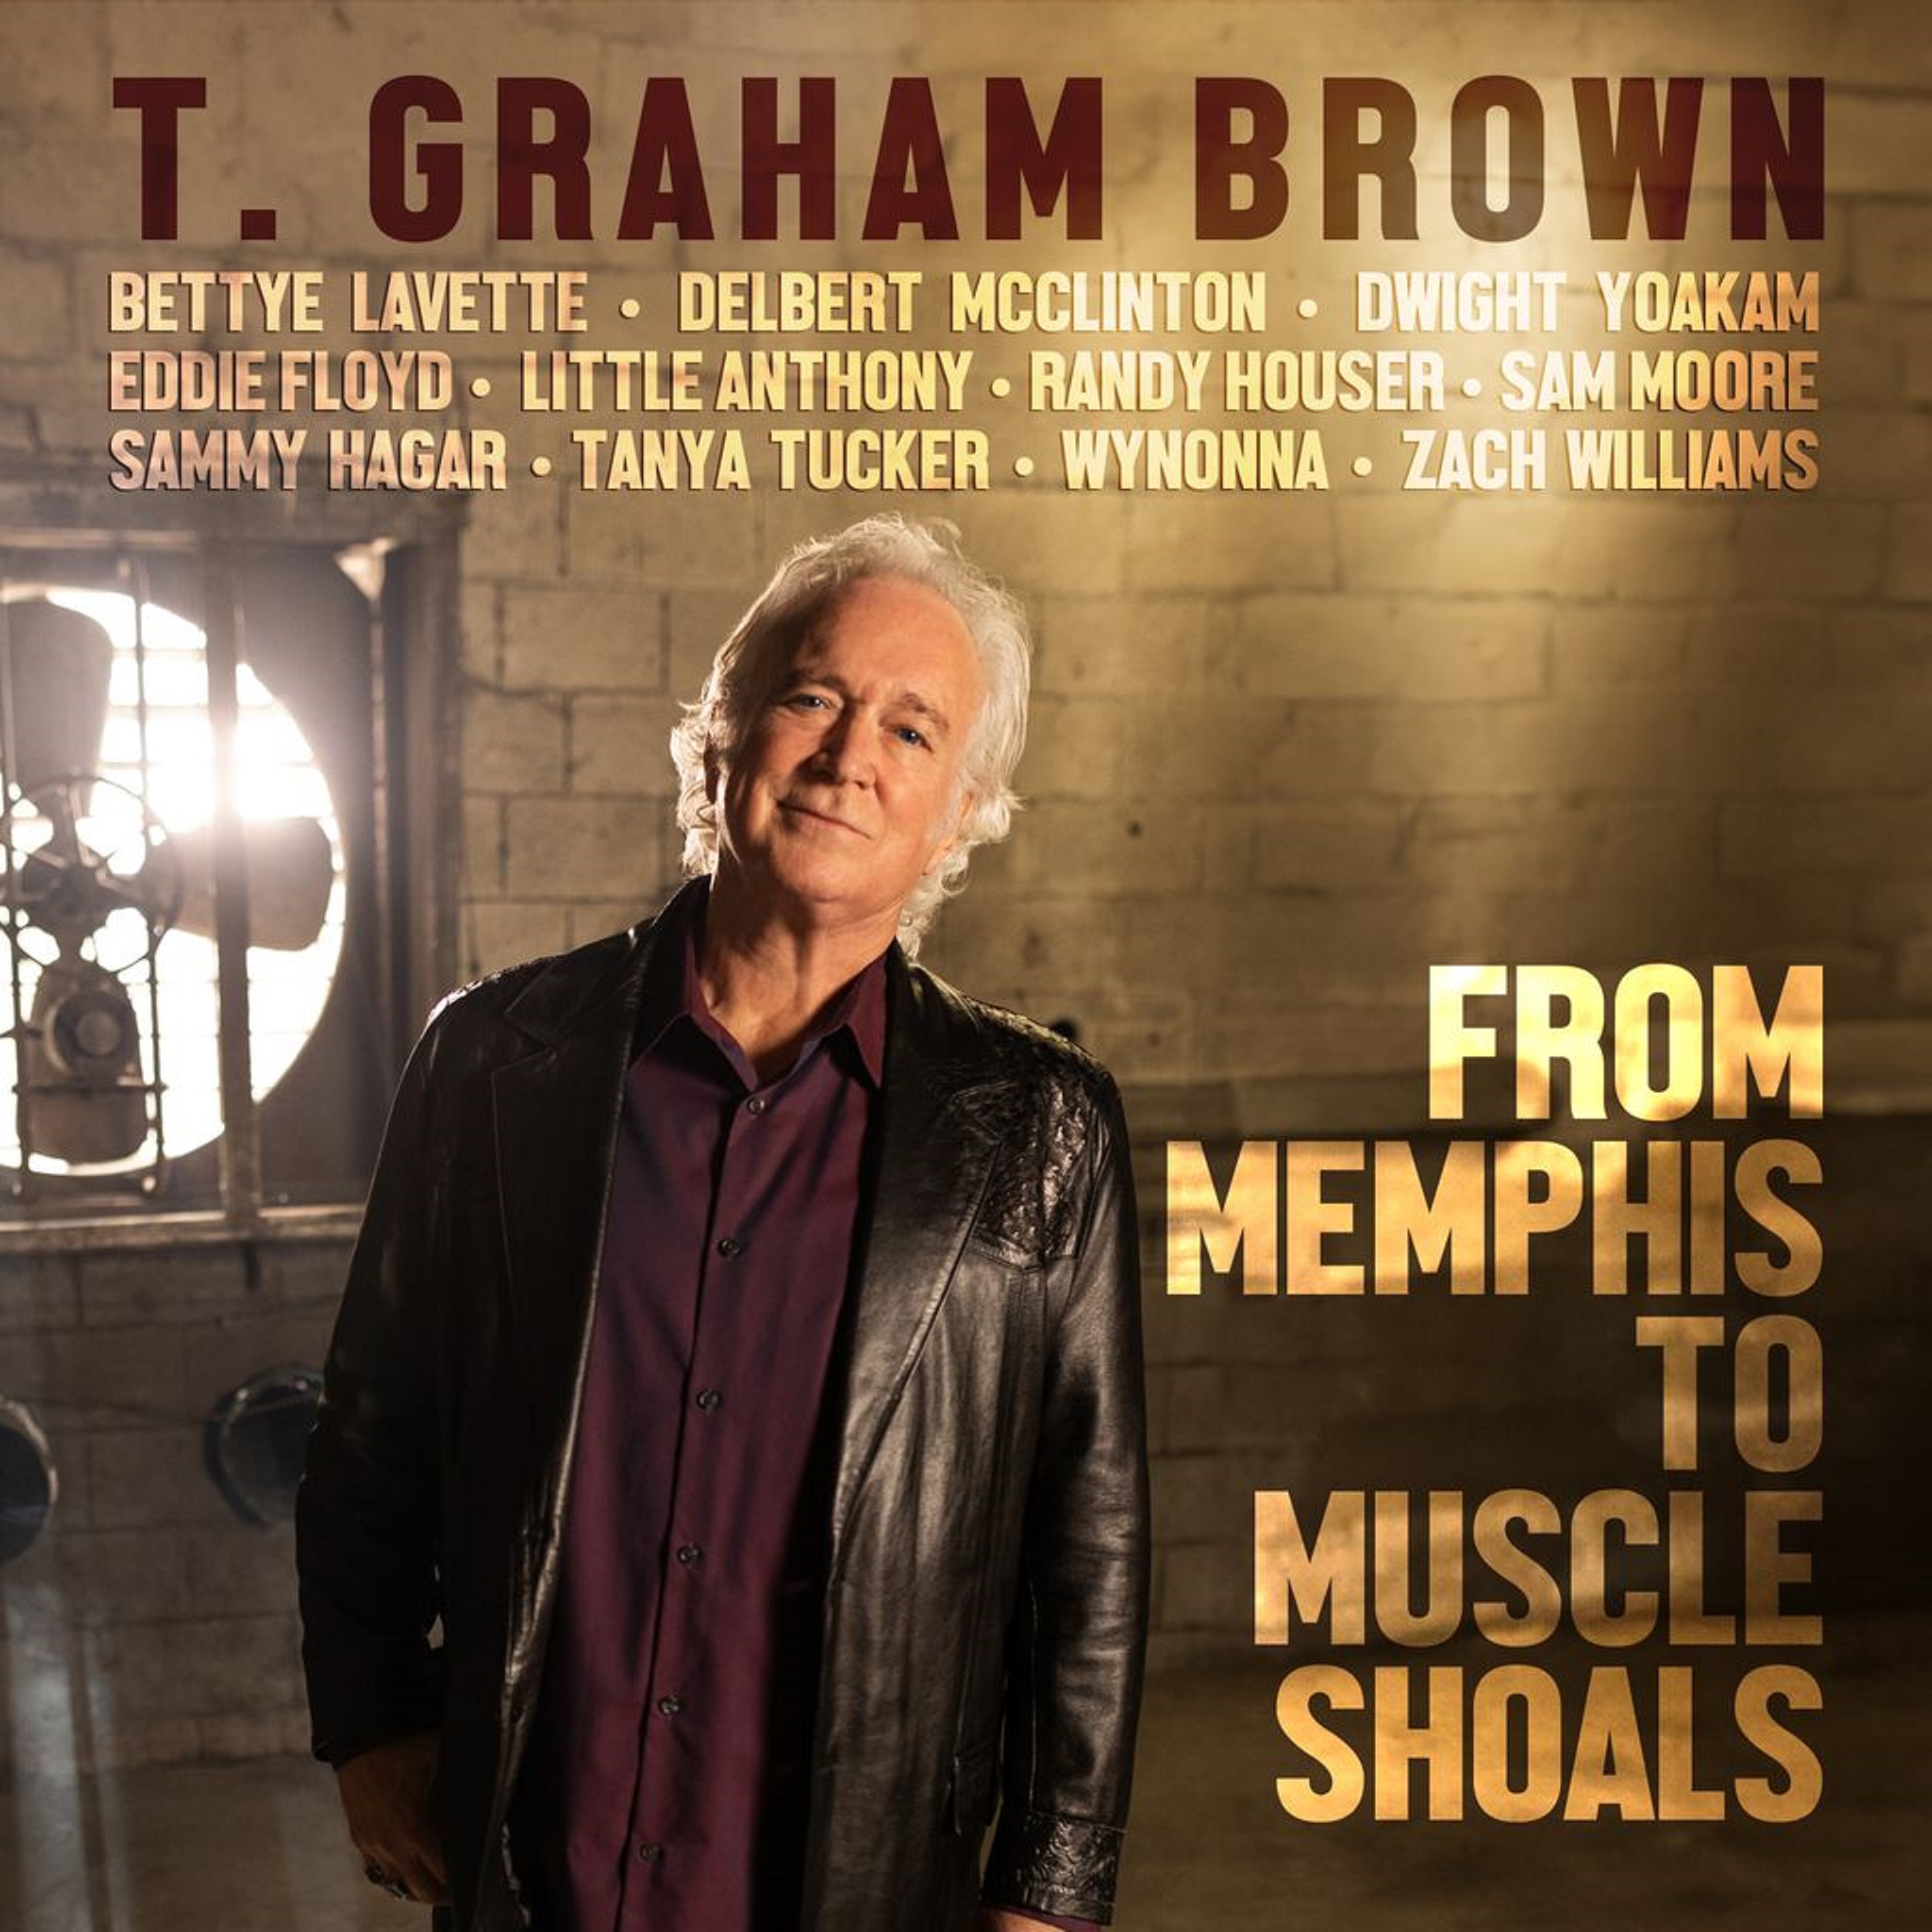 T. Graham Brown Reveals New Studio Album 'From Memphis to Muscle Shoals' with Legendary Collaborations: Pre-Order Now!